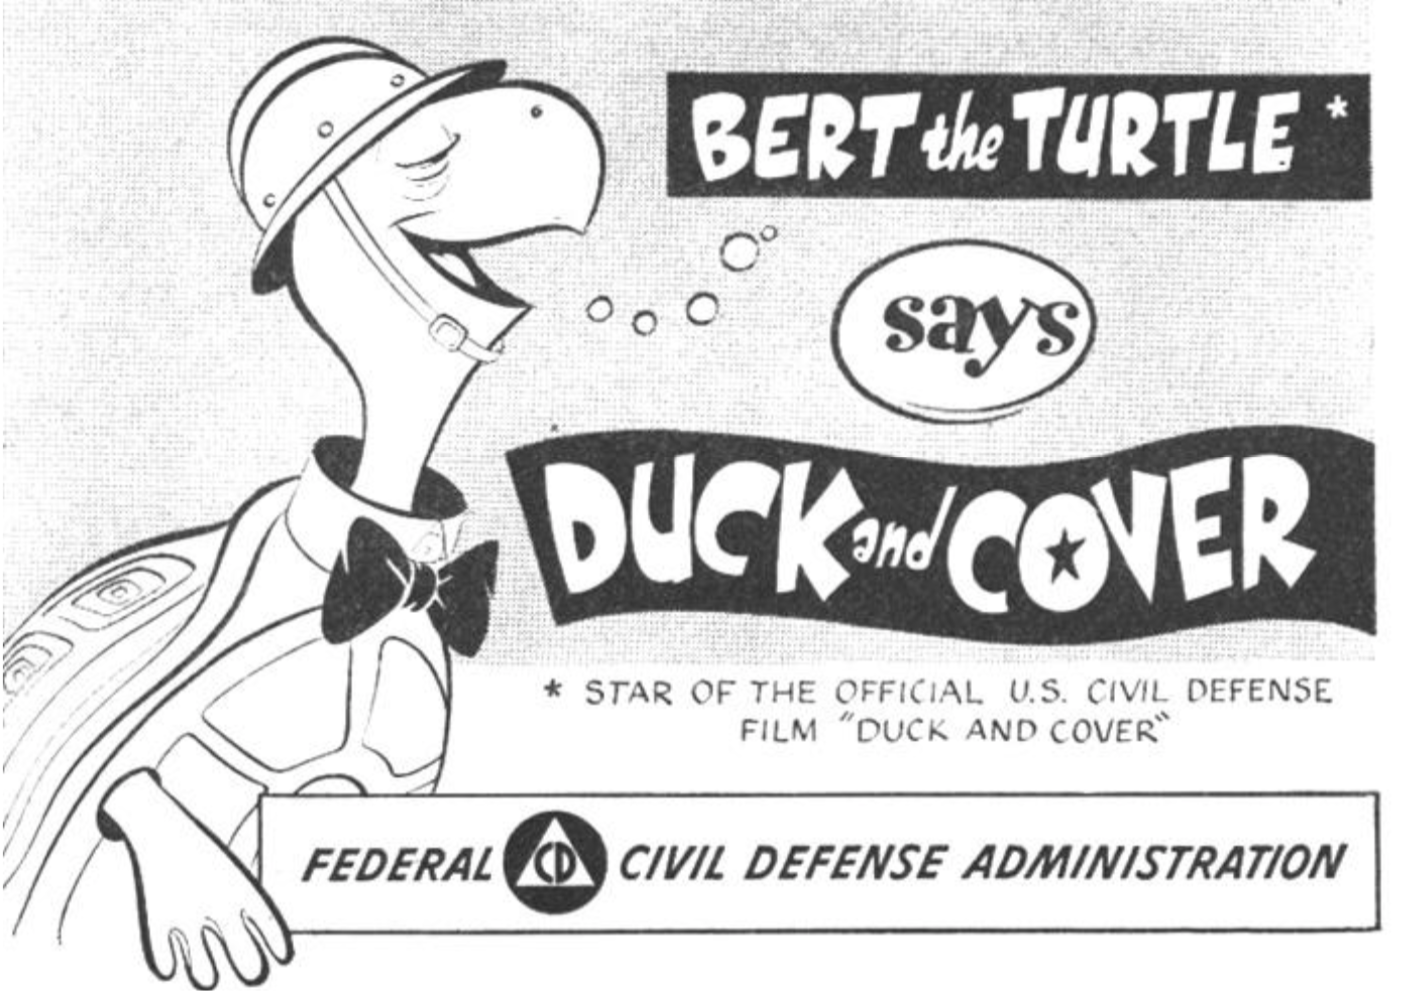 Figure 2. A friendly cartoon turtle provides advice to the American public during the Cold War era in a film for school-aged children, “Duck and Cover” (Rizzo 1951)